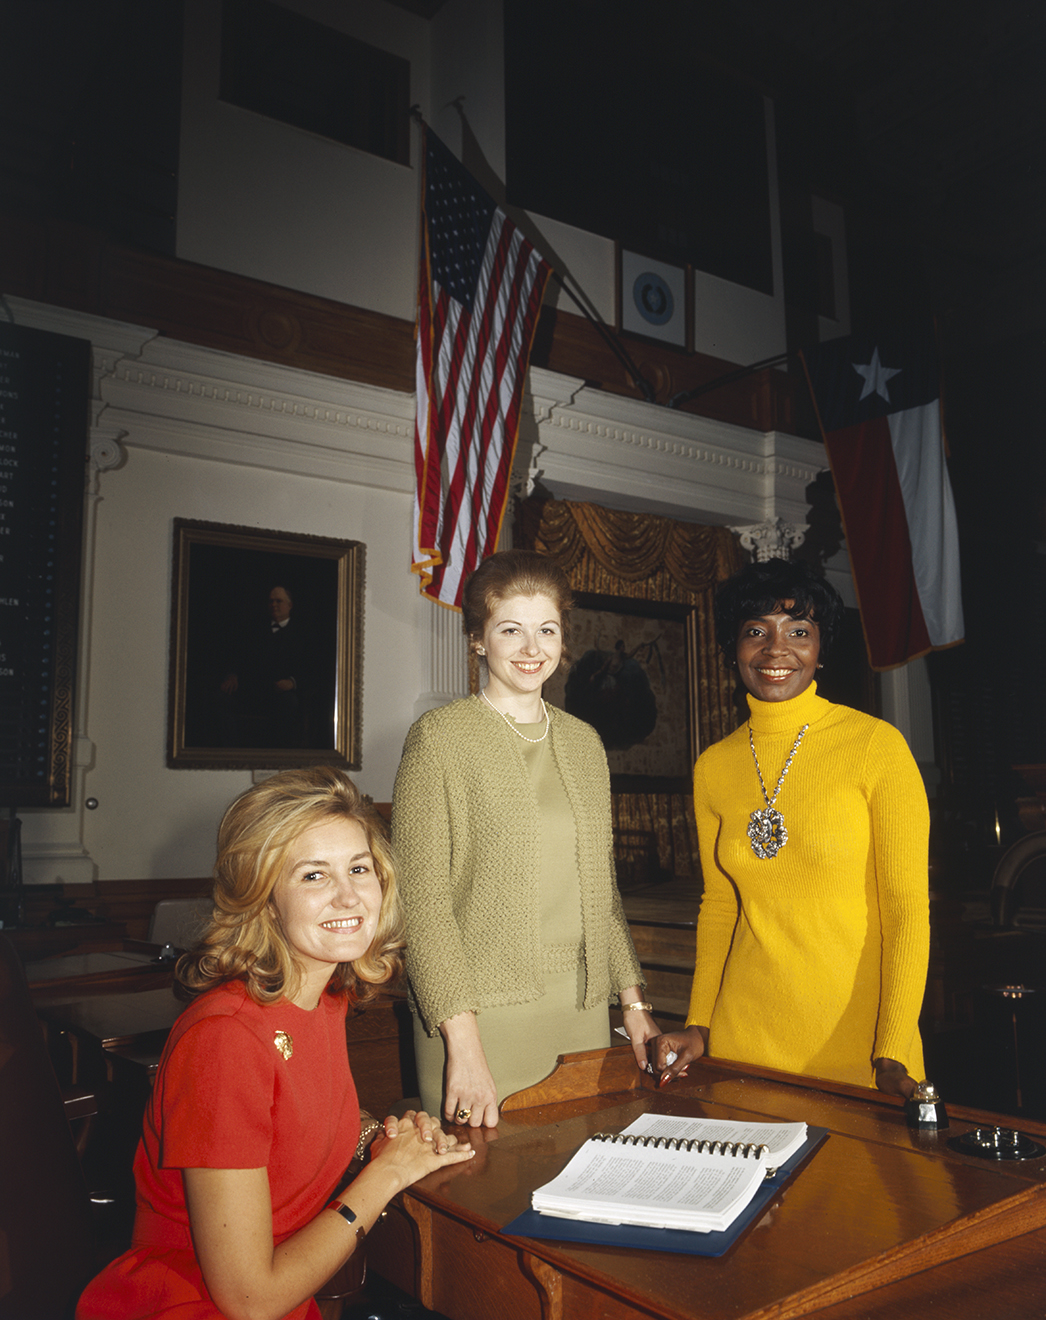 Republican Kay Bailey of Harris County, left, and Democrats Sarah Weddington, center, of Travis County, and Eddie Bernice Johnson of Dallas County are pictured in the House chamber at the Texas state Capitol Building in Austin, Texas. 